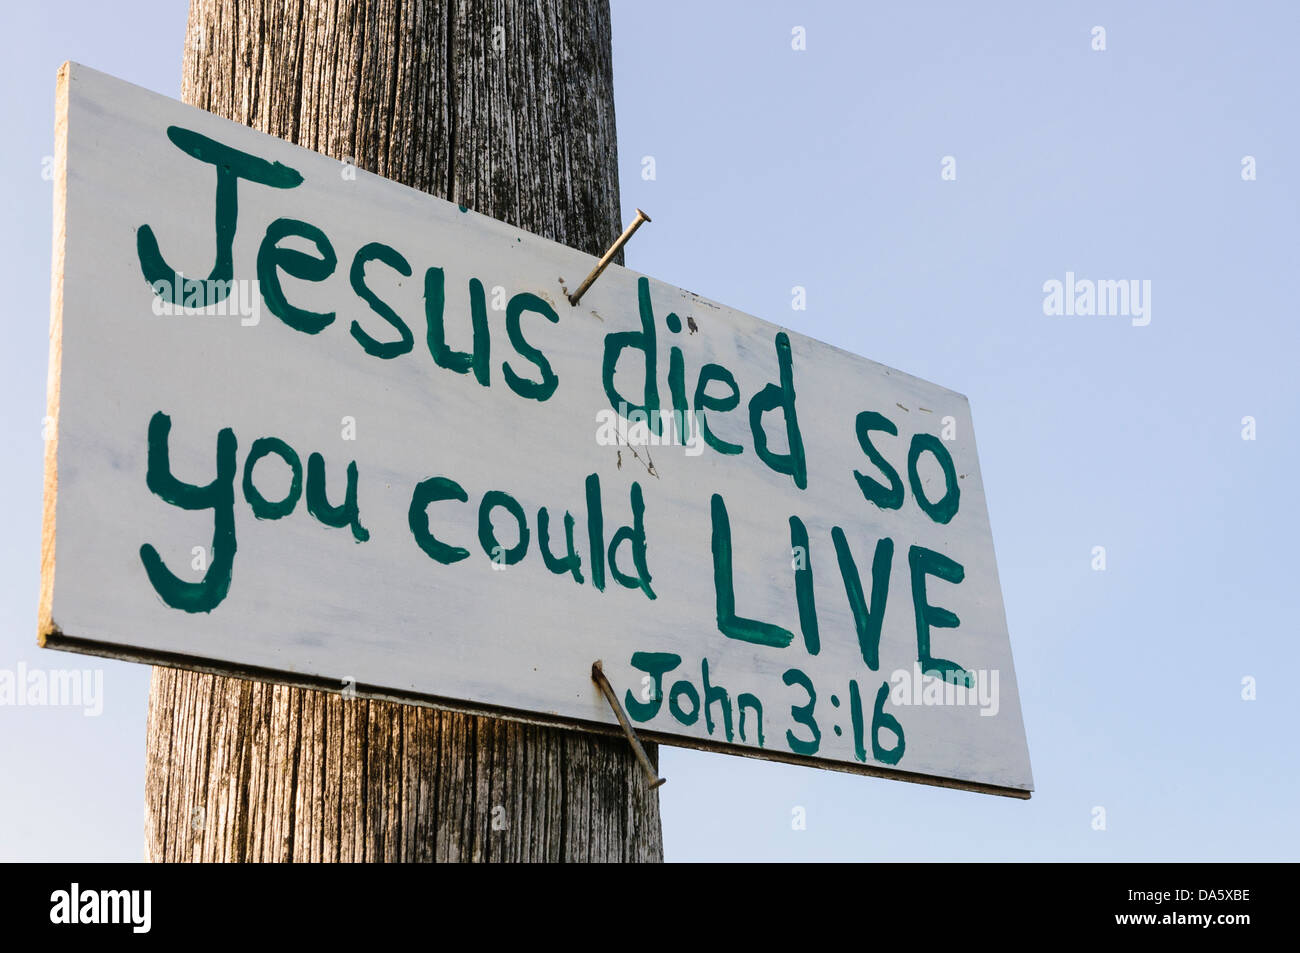 Sign on a lampost with hand-written message 'Jesus died so you could live', typically found in rural parts of Northern Ireland Stock Photo